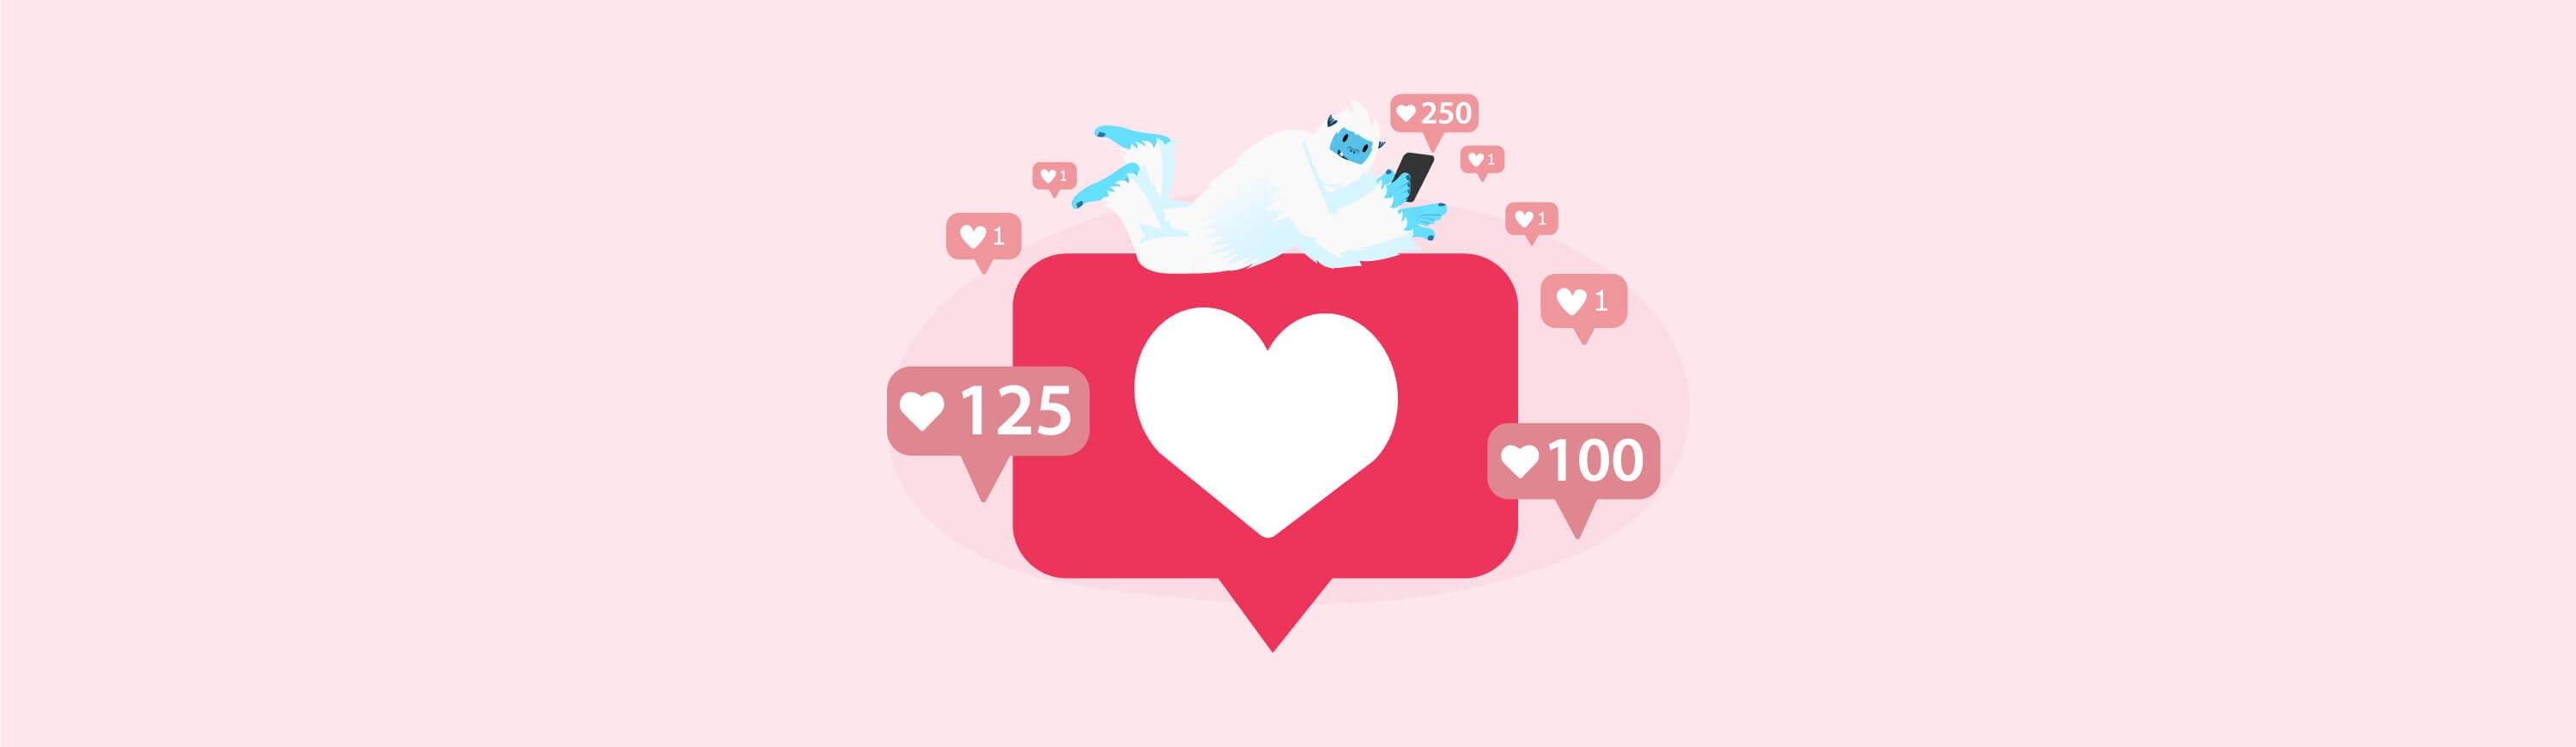 Illustration of Carl the yeti laying on a message icon surrounded by hearts.